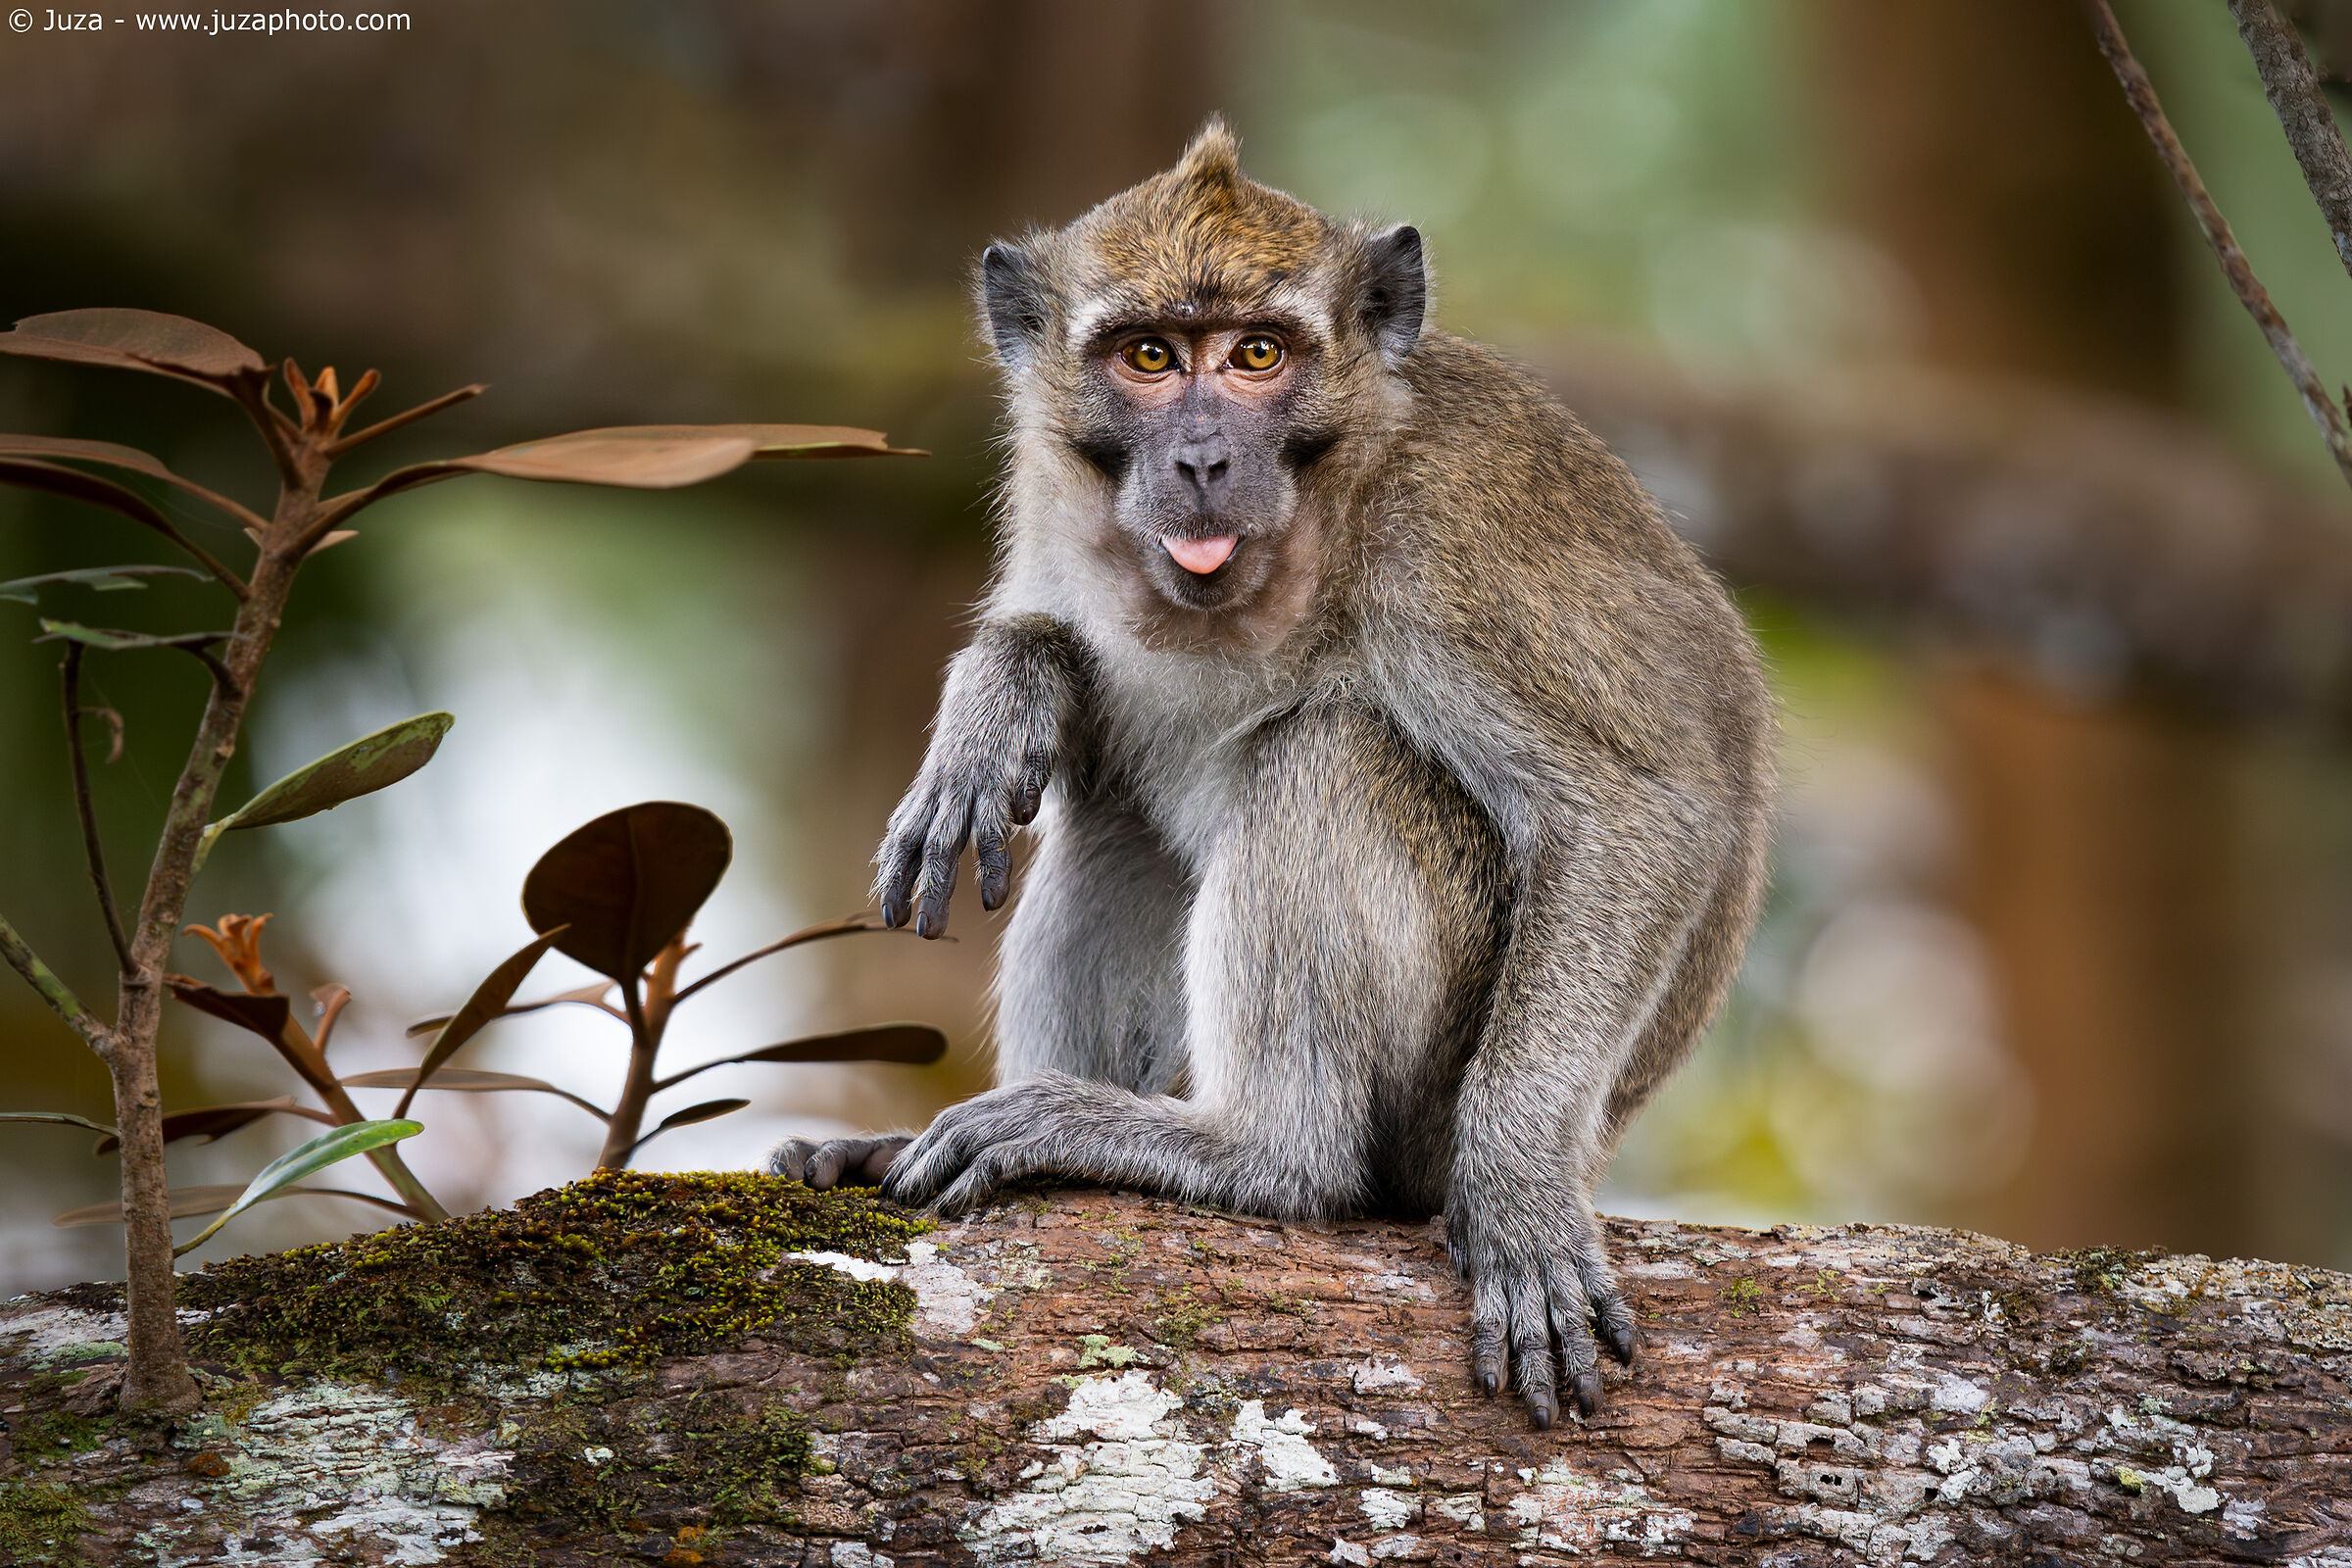 The tongue of the macaque...